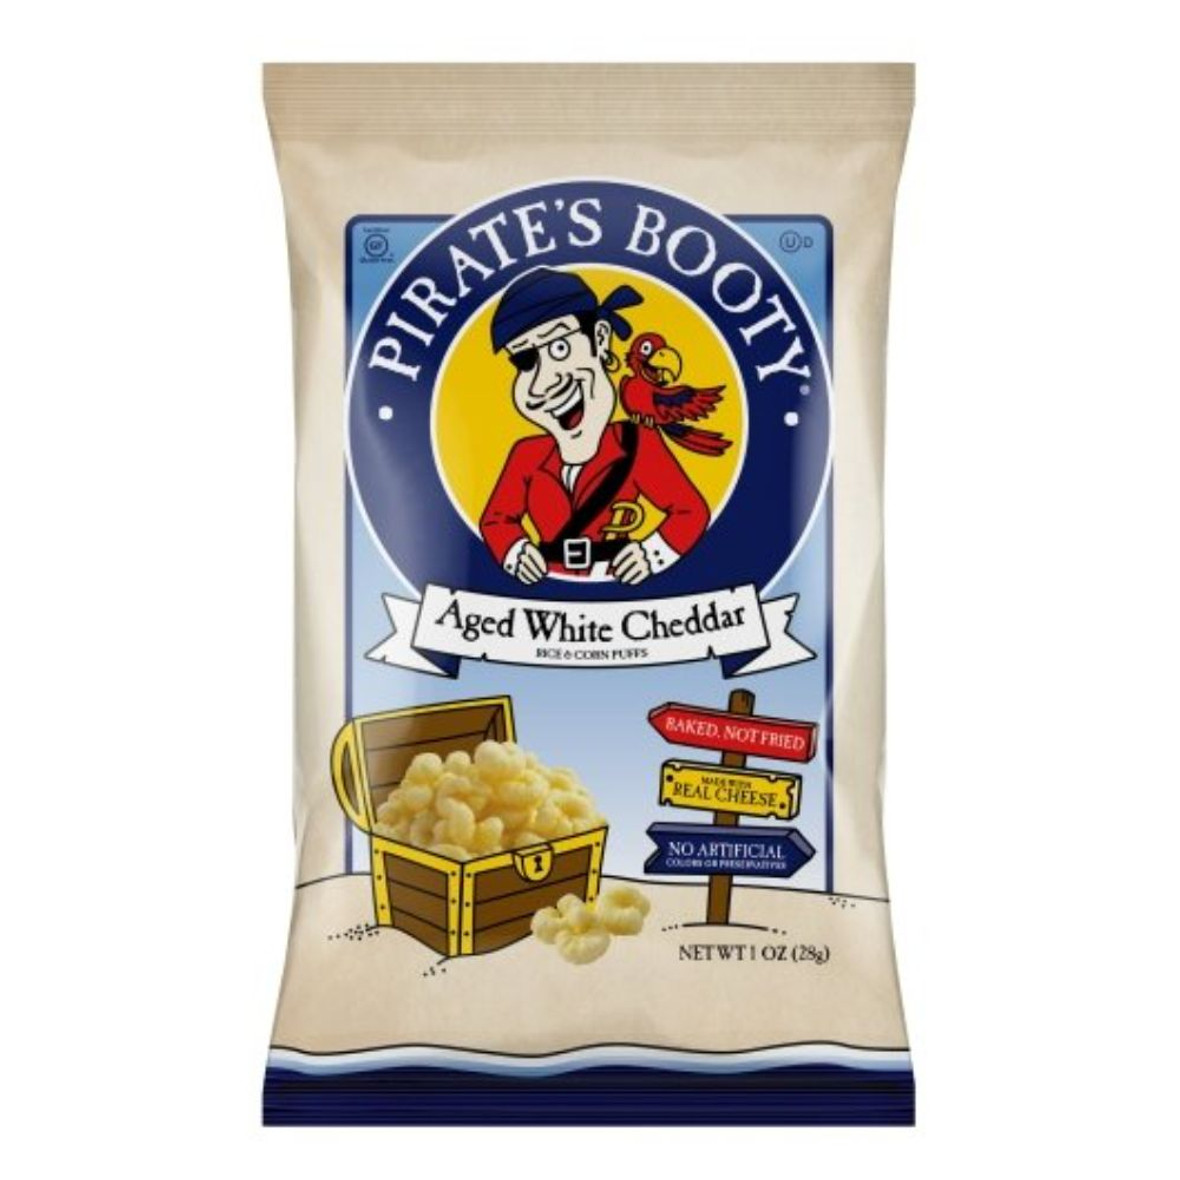 Pirate's Booty Aged White Cheddar Cheese Puffs